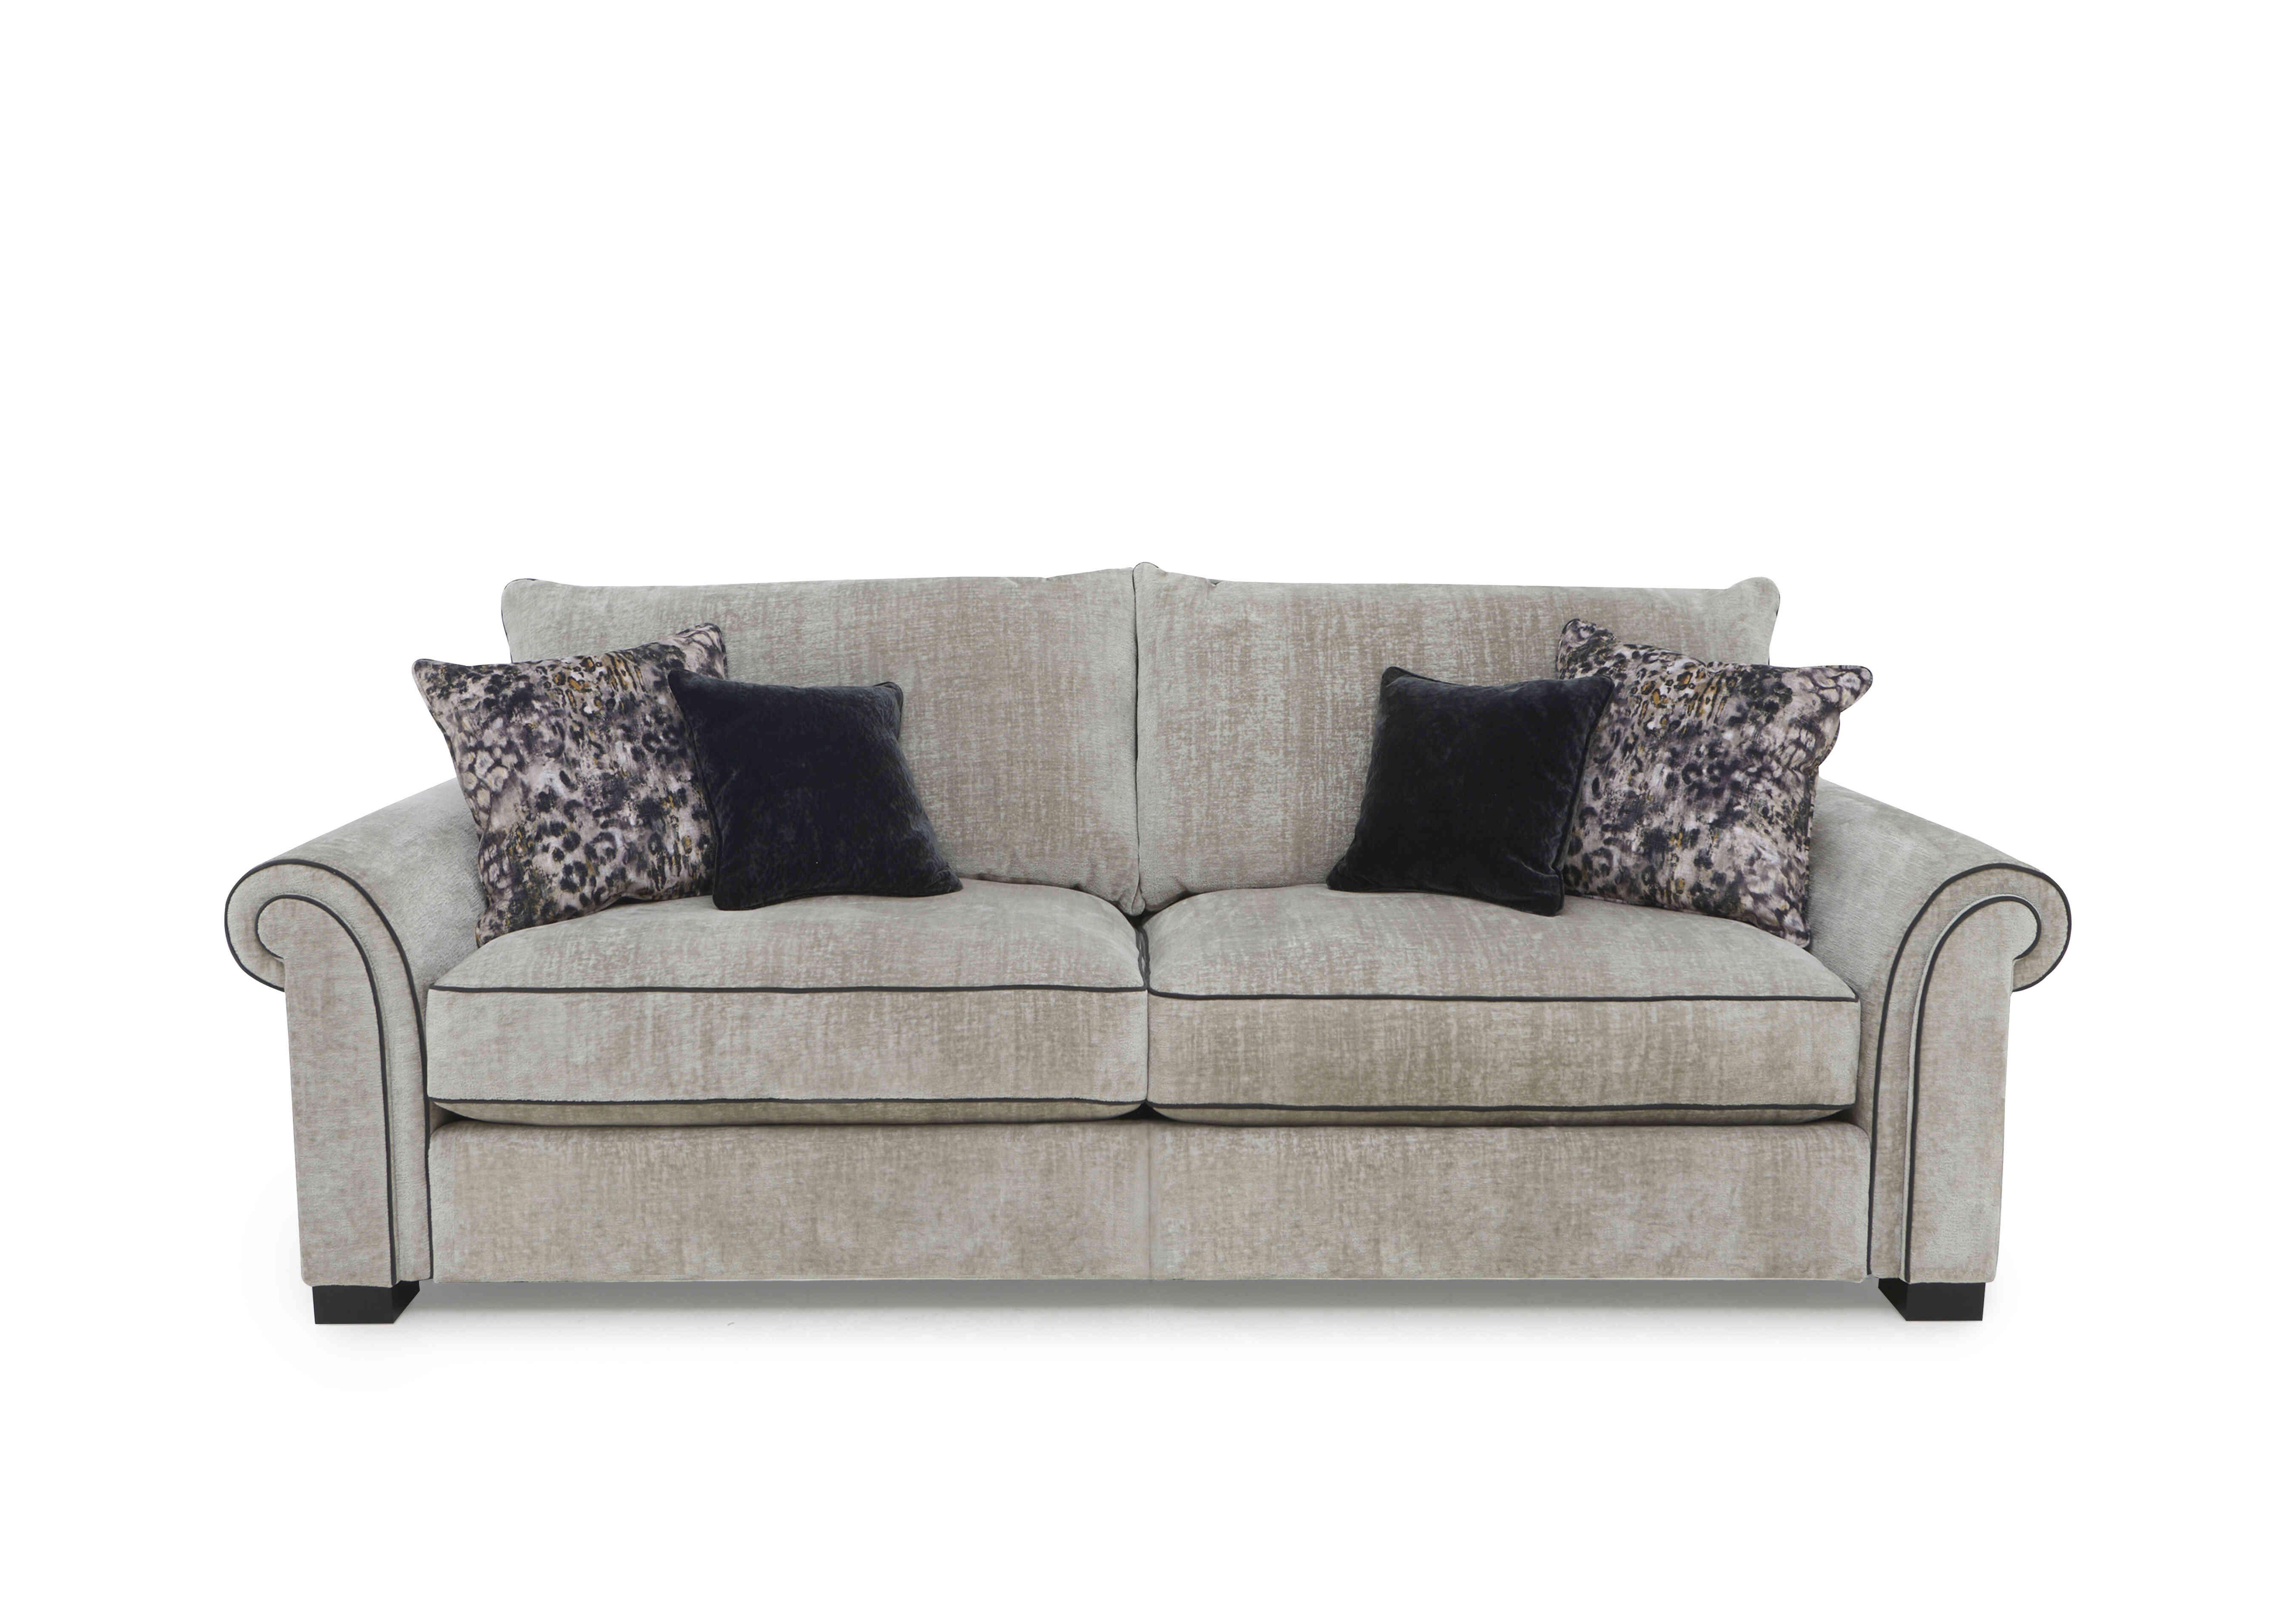 Modern Classics St James Park 3 Seater Sofa in Remini Oyster Cp Mf on Furniture Village